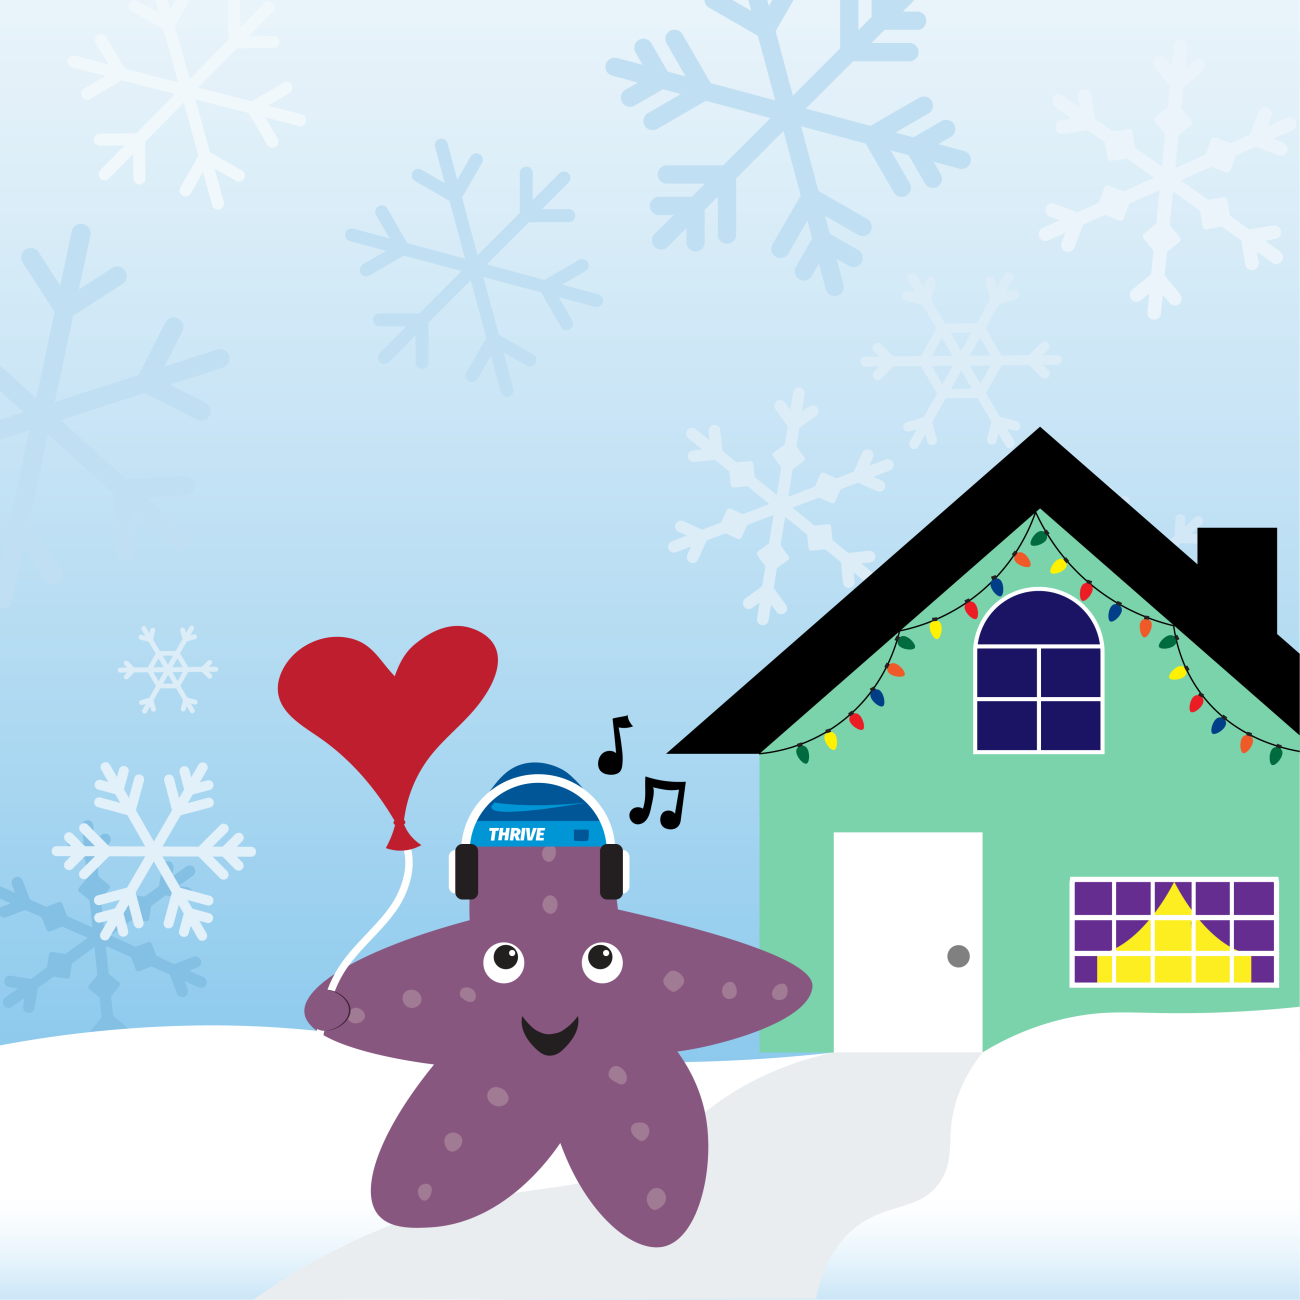 A purple starfish wearing a knit hat and holding a red heart-shaped balloon on a snowy hill in front of a house decorated with holiday lights framed by snowflakes